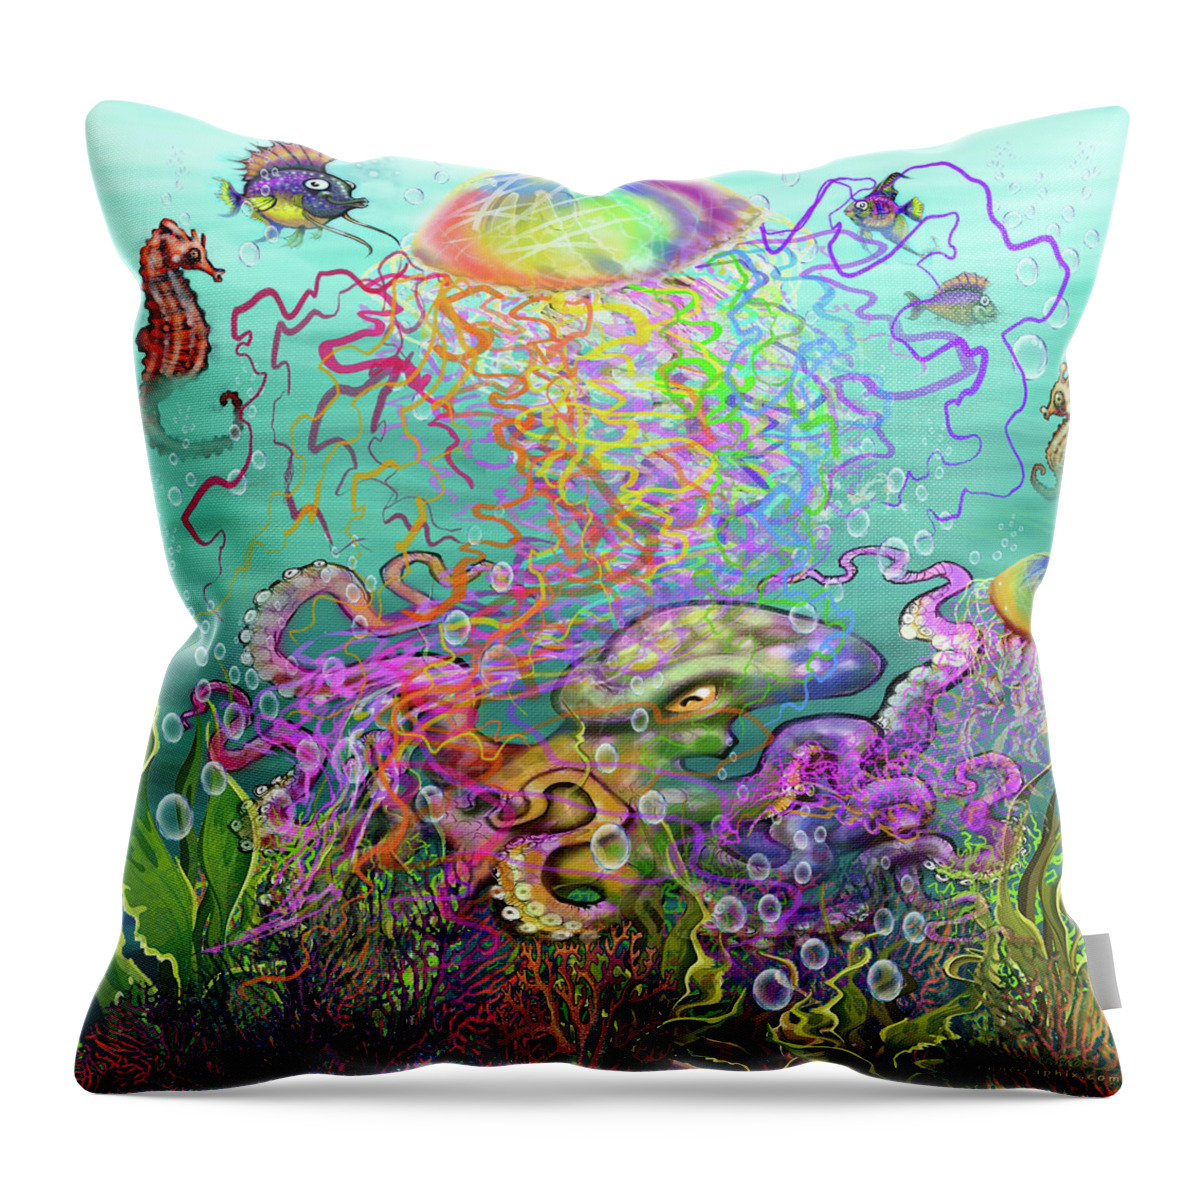 Rainbow Throw Pillow featuring the digital art Rainbow Jellyfish and Friends by Kevin Middleton